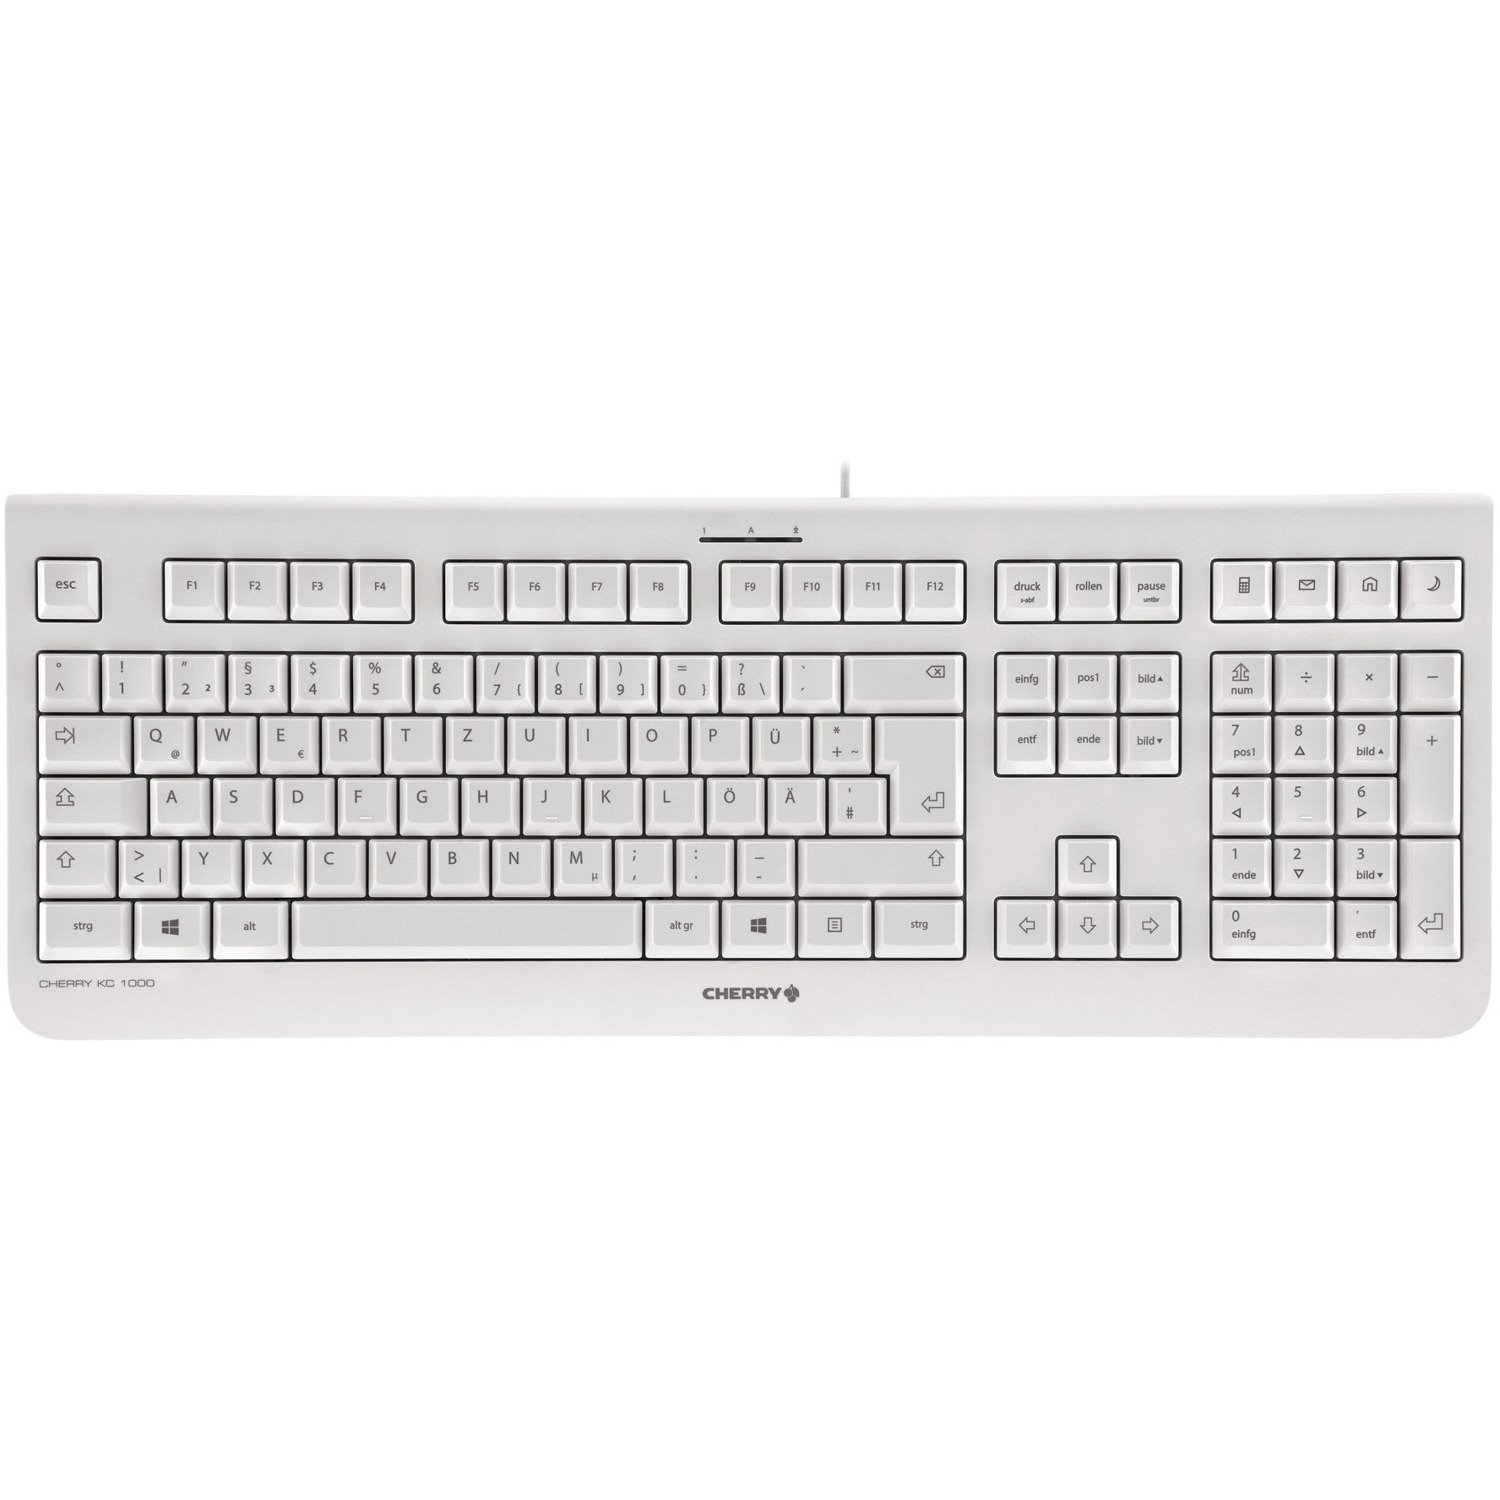 CHERRY KC 1000 Keyboard - Cable Connectivity - USB Interface - French - Pale Gray